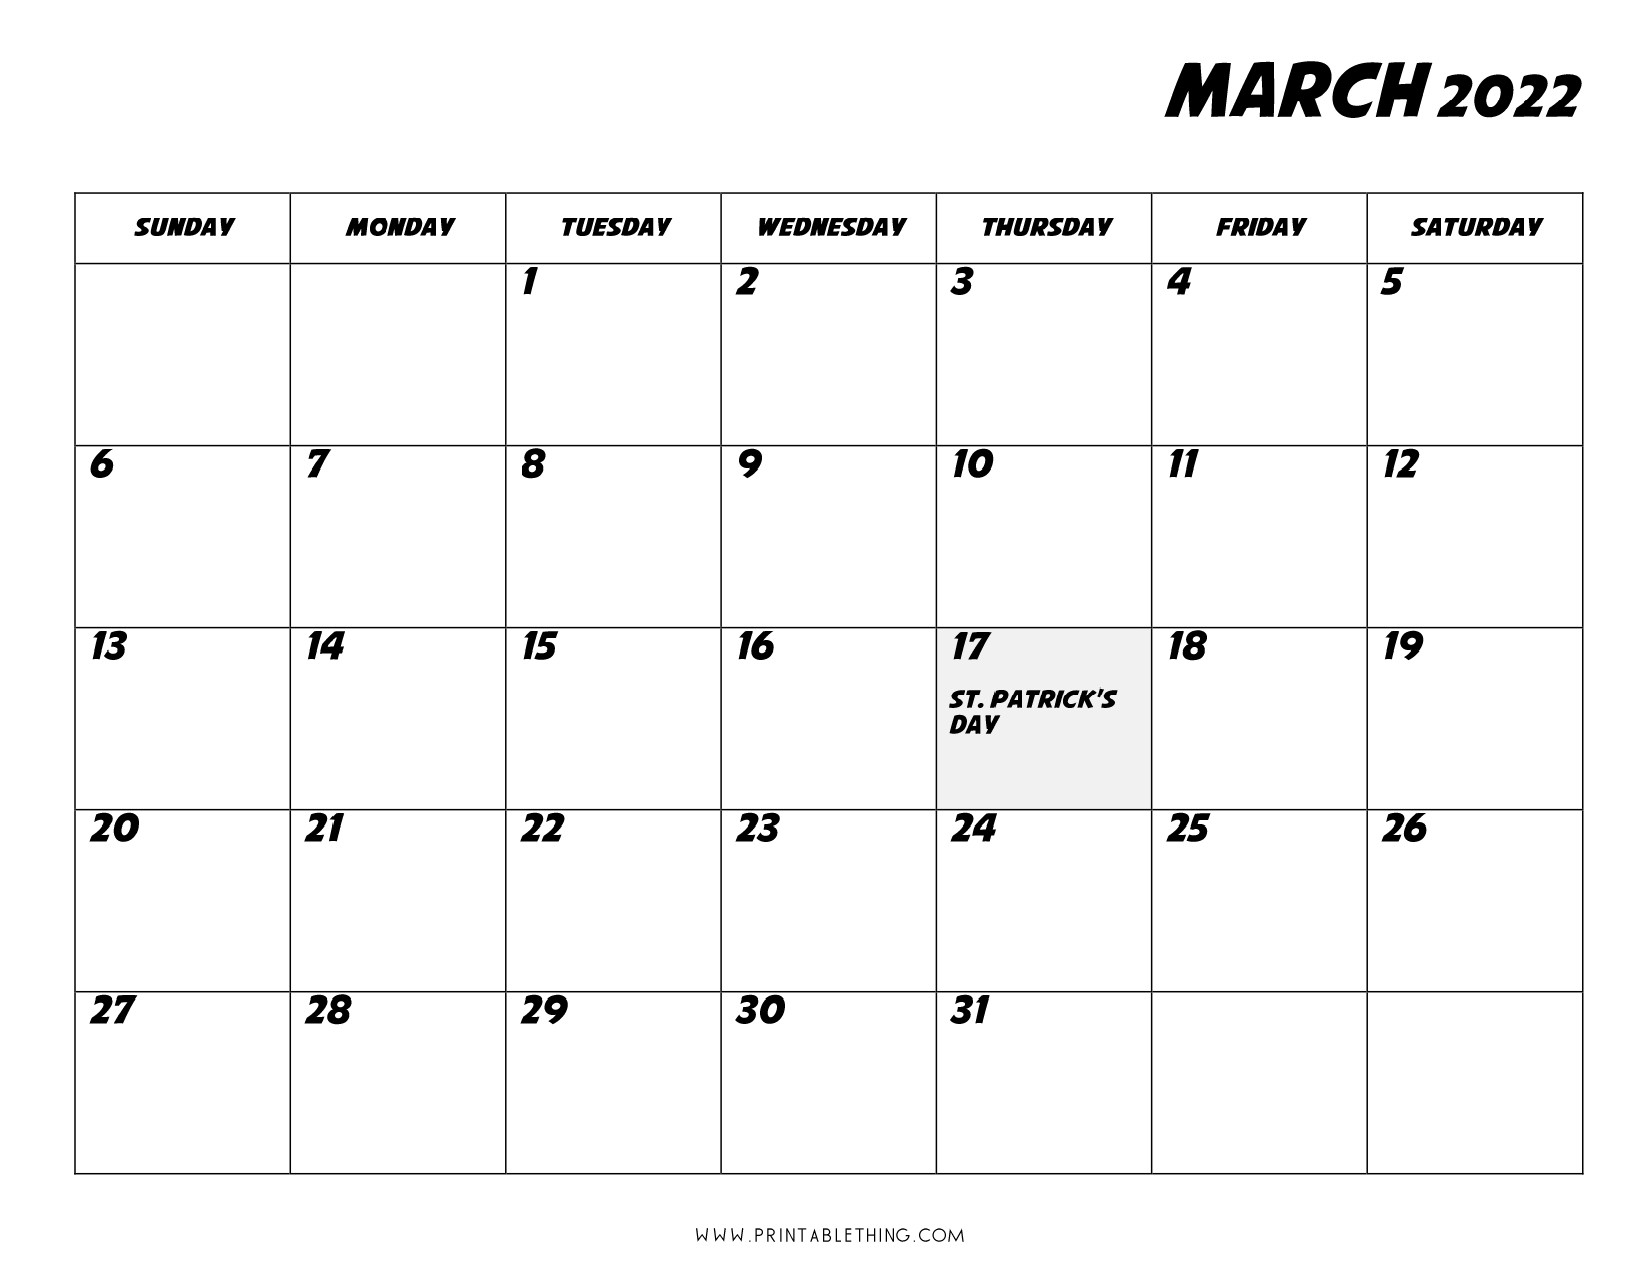 March 2022 Calendar Printable, Pdf, Us Holidays, Blank  Calendar Of March And April 2022